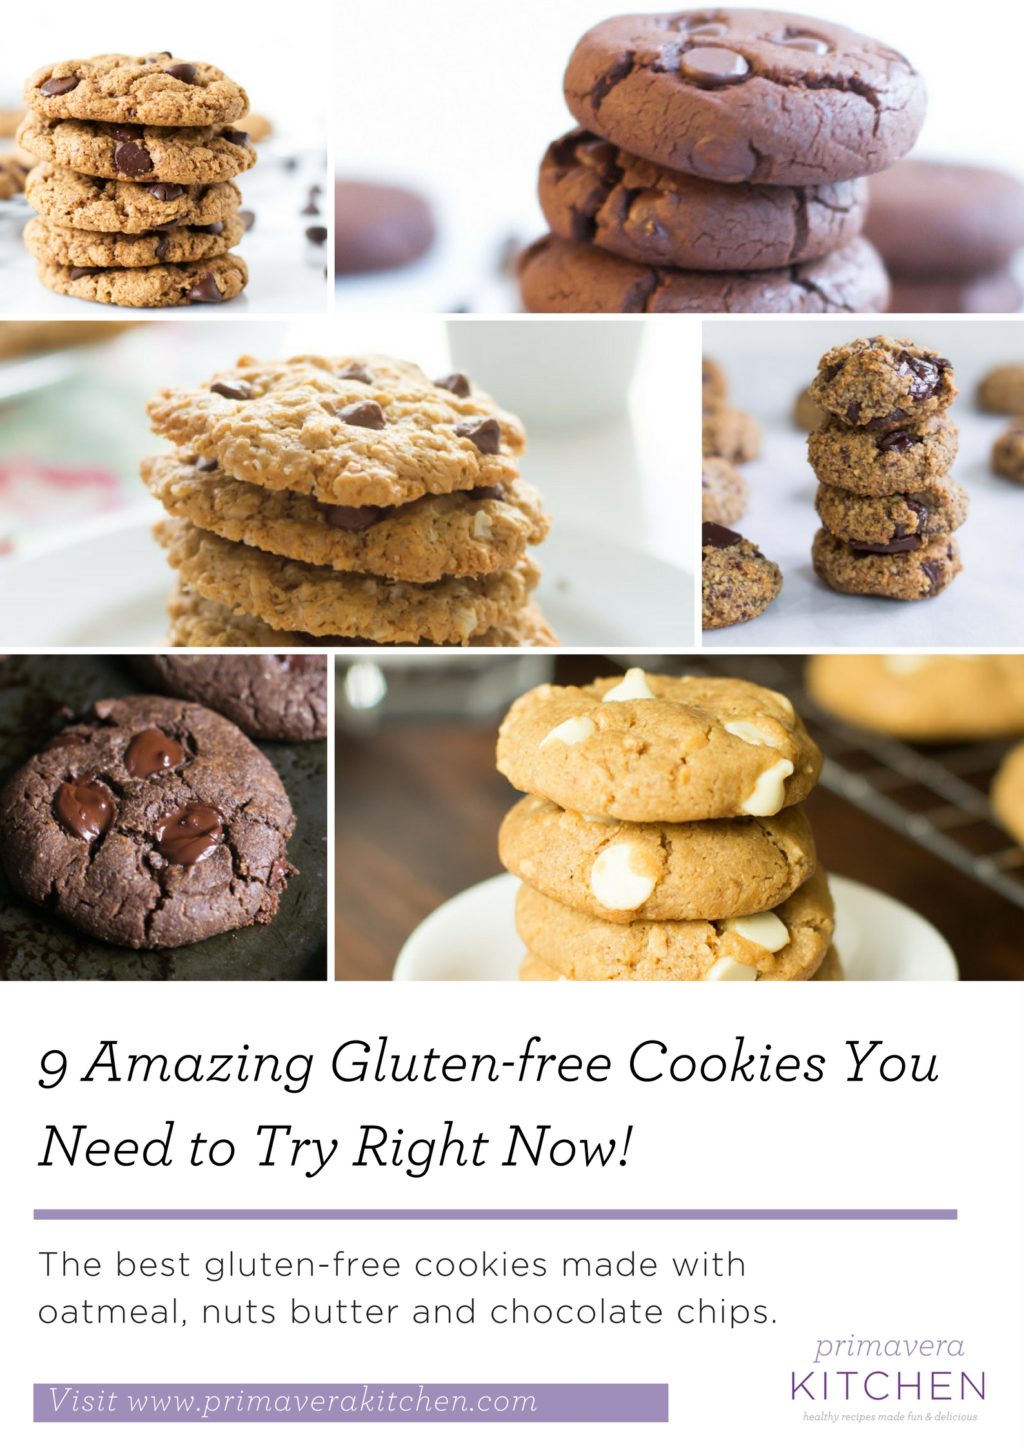 9 Amazing Gluten-free Cookies You Need to Try Right Now - These are the list of 9 amazing gluten-free cookies made with oatmeal, nuts butter and chocolate chips.